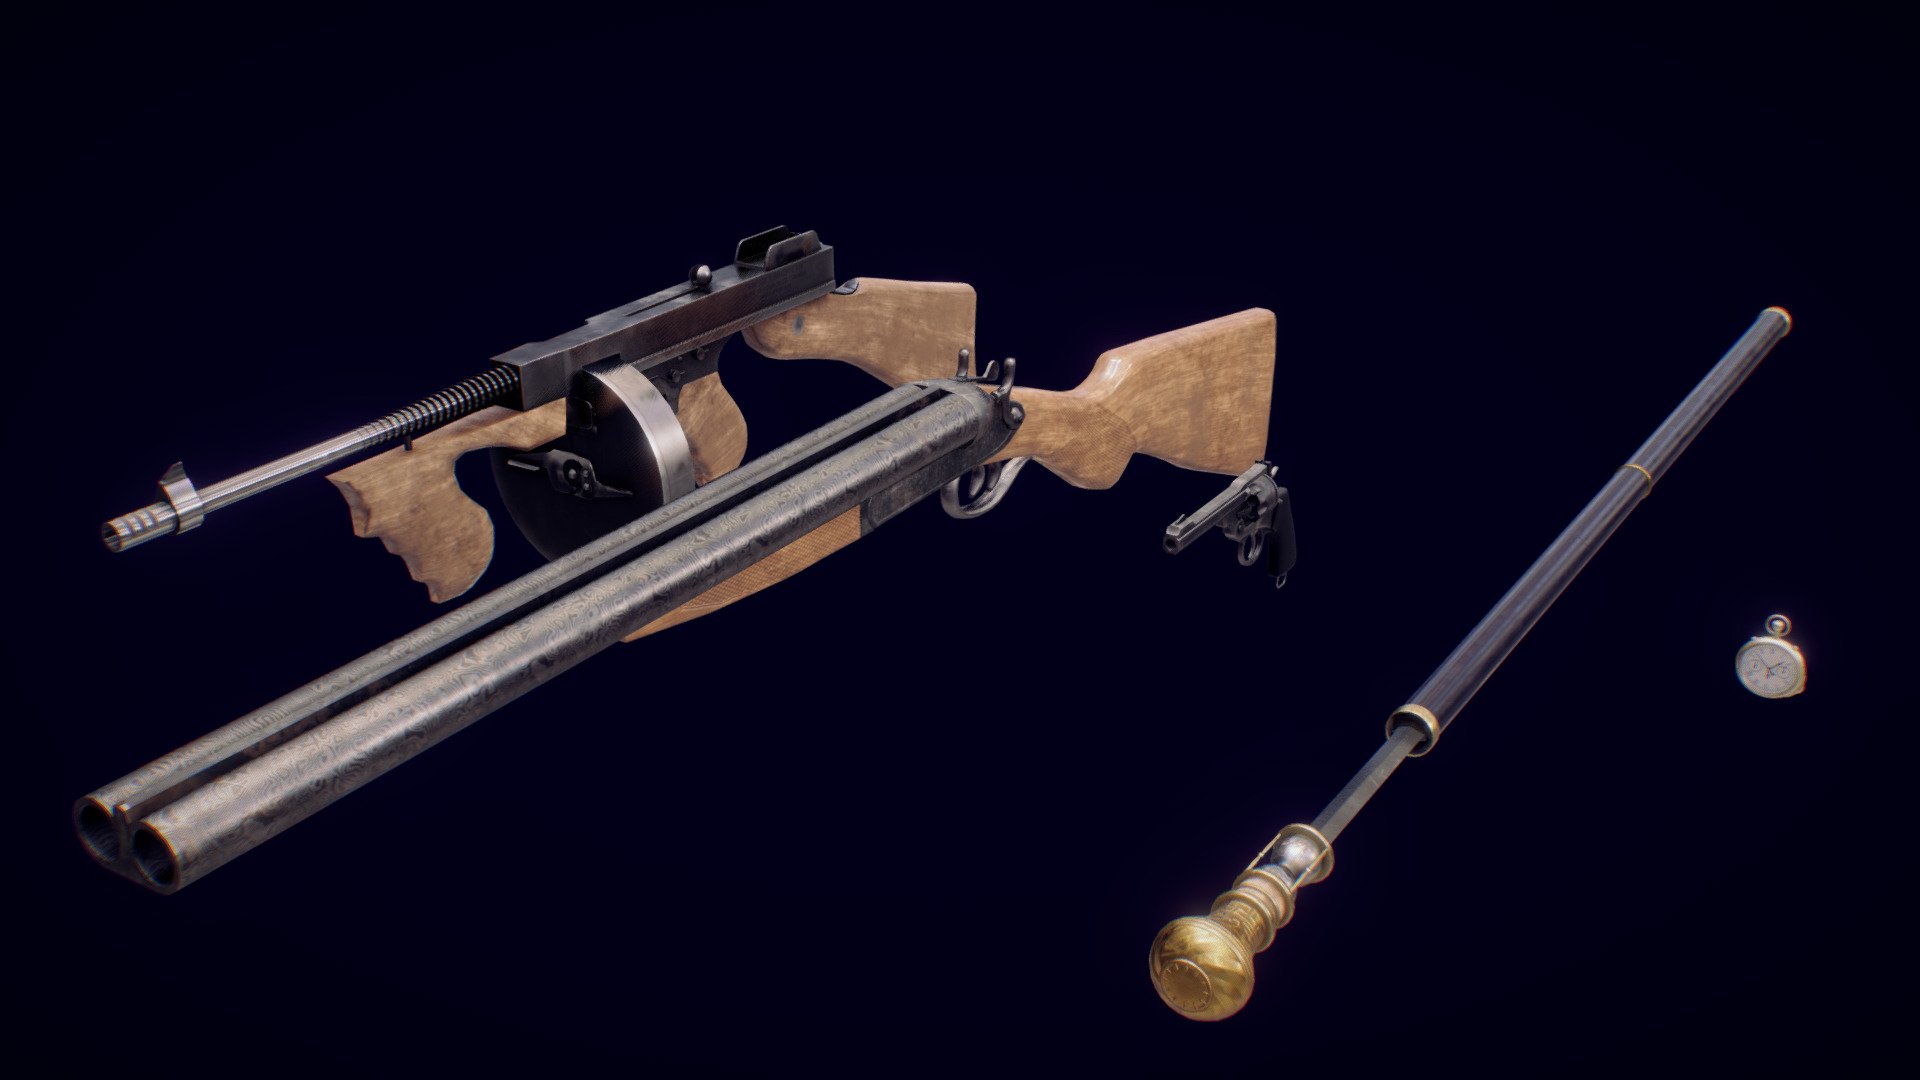 Made for Split Aeon, a first-person shooting game project. The game is set in the 1920s with magical elements and the ability to time travel. The guns and the cane are used to defeat enemies while navigating through Paradox Theater, while the pocket watch is an off-hand tool that allows one to travel 50 years into and back to the past 3d model